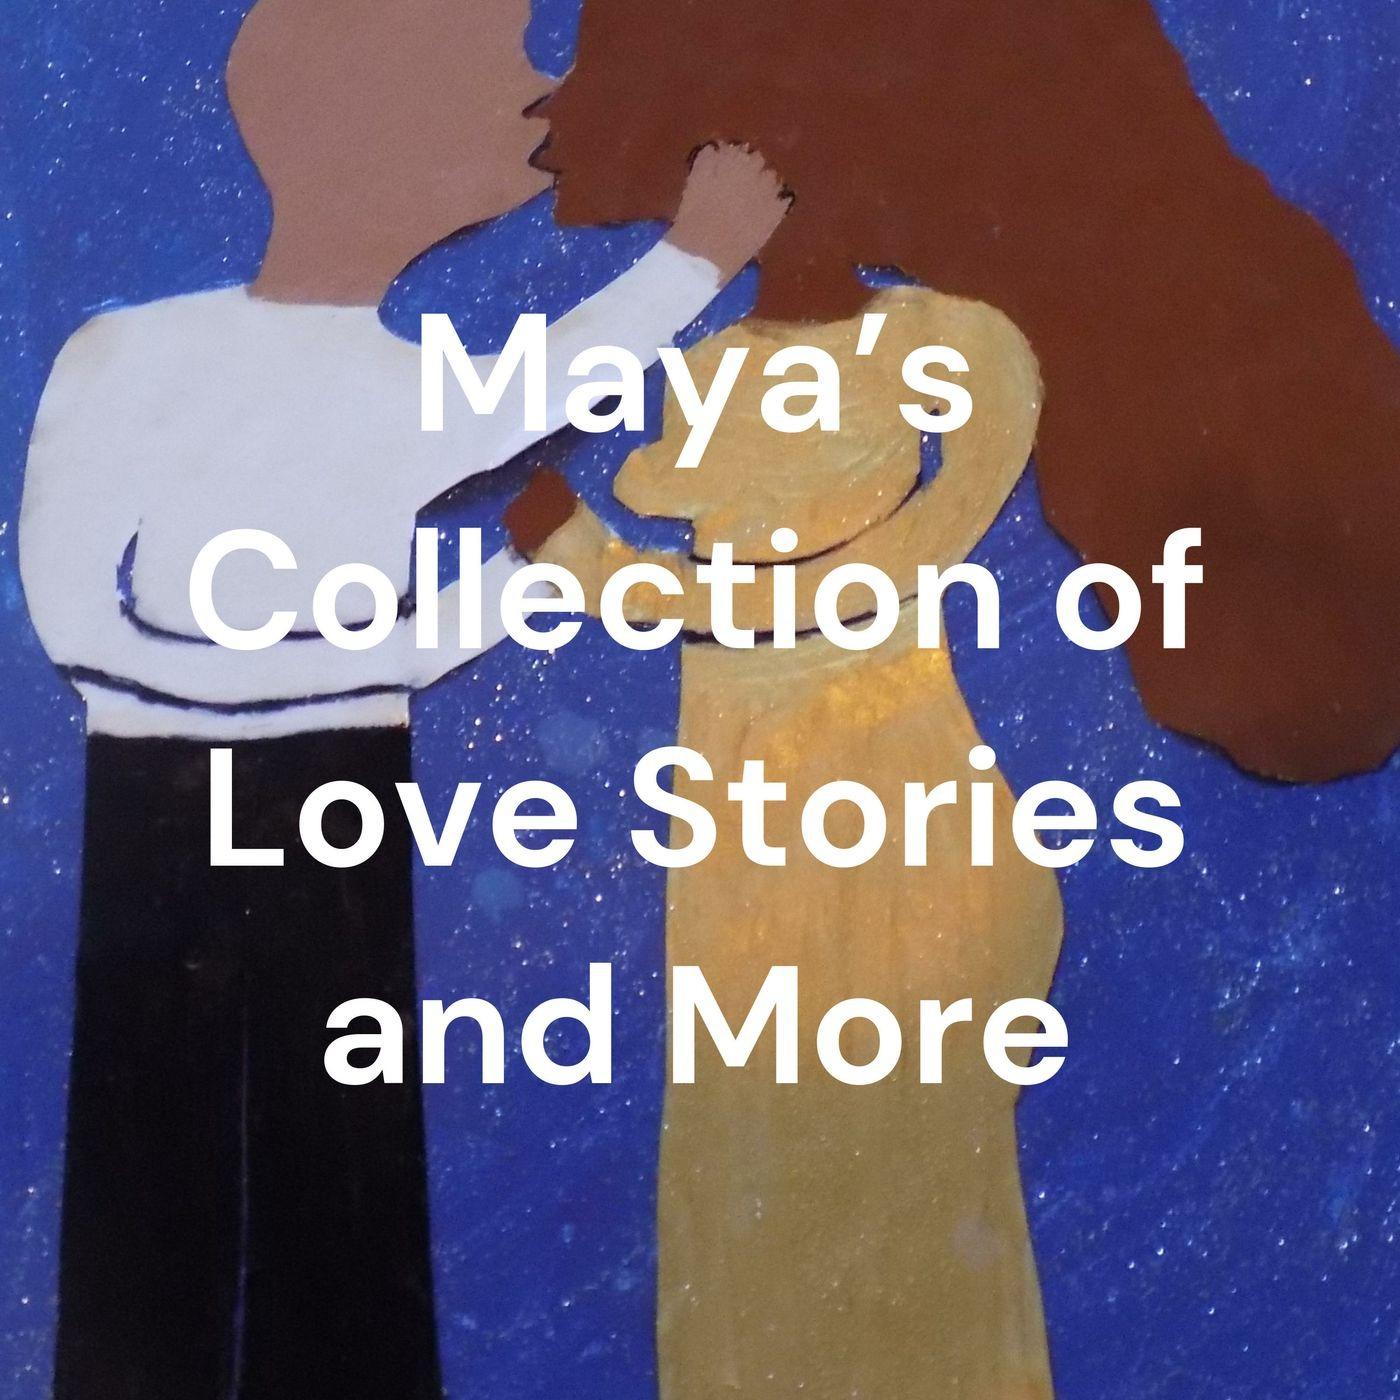 Maya's Collection of Love Stories and More